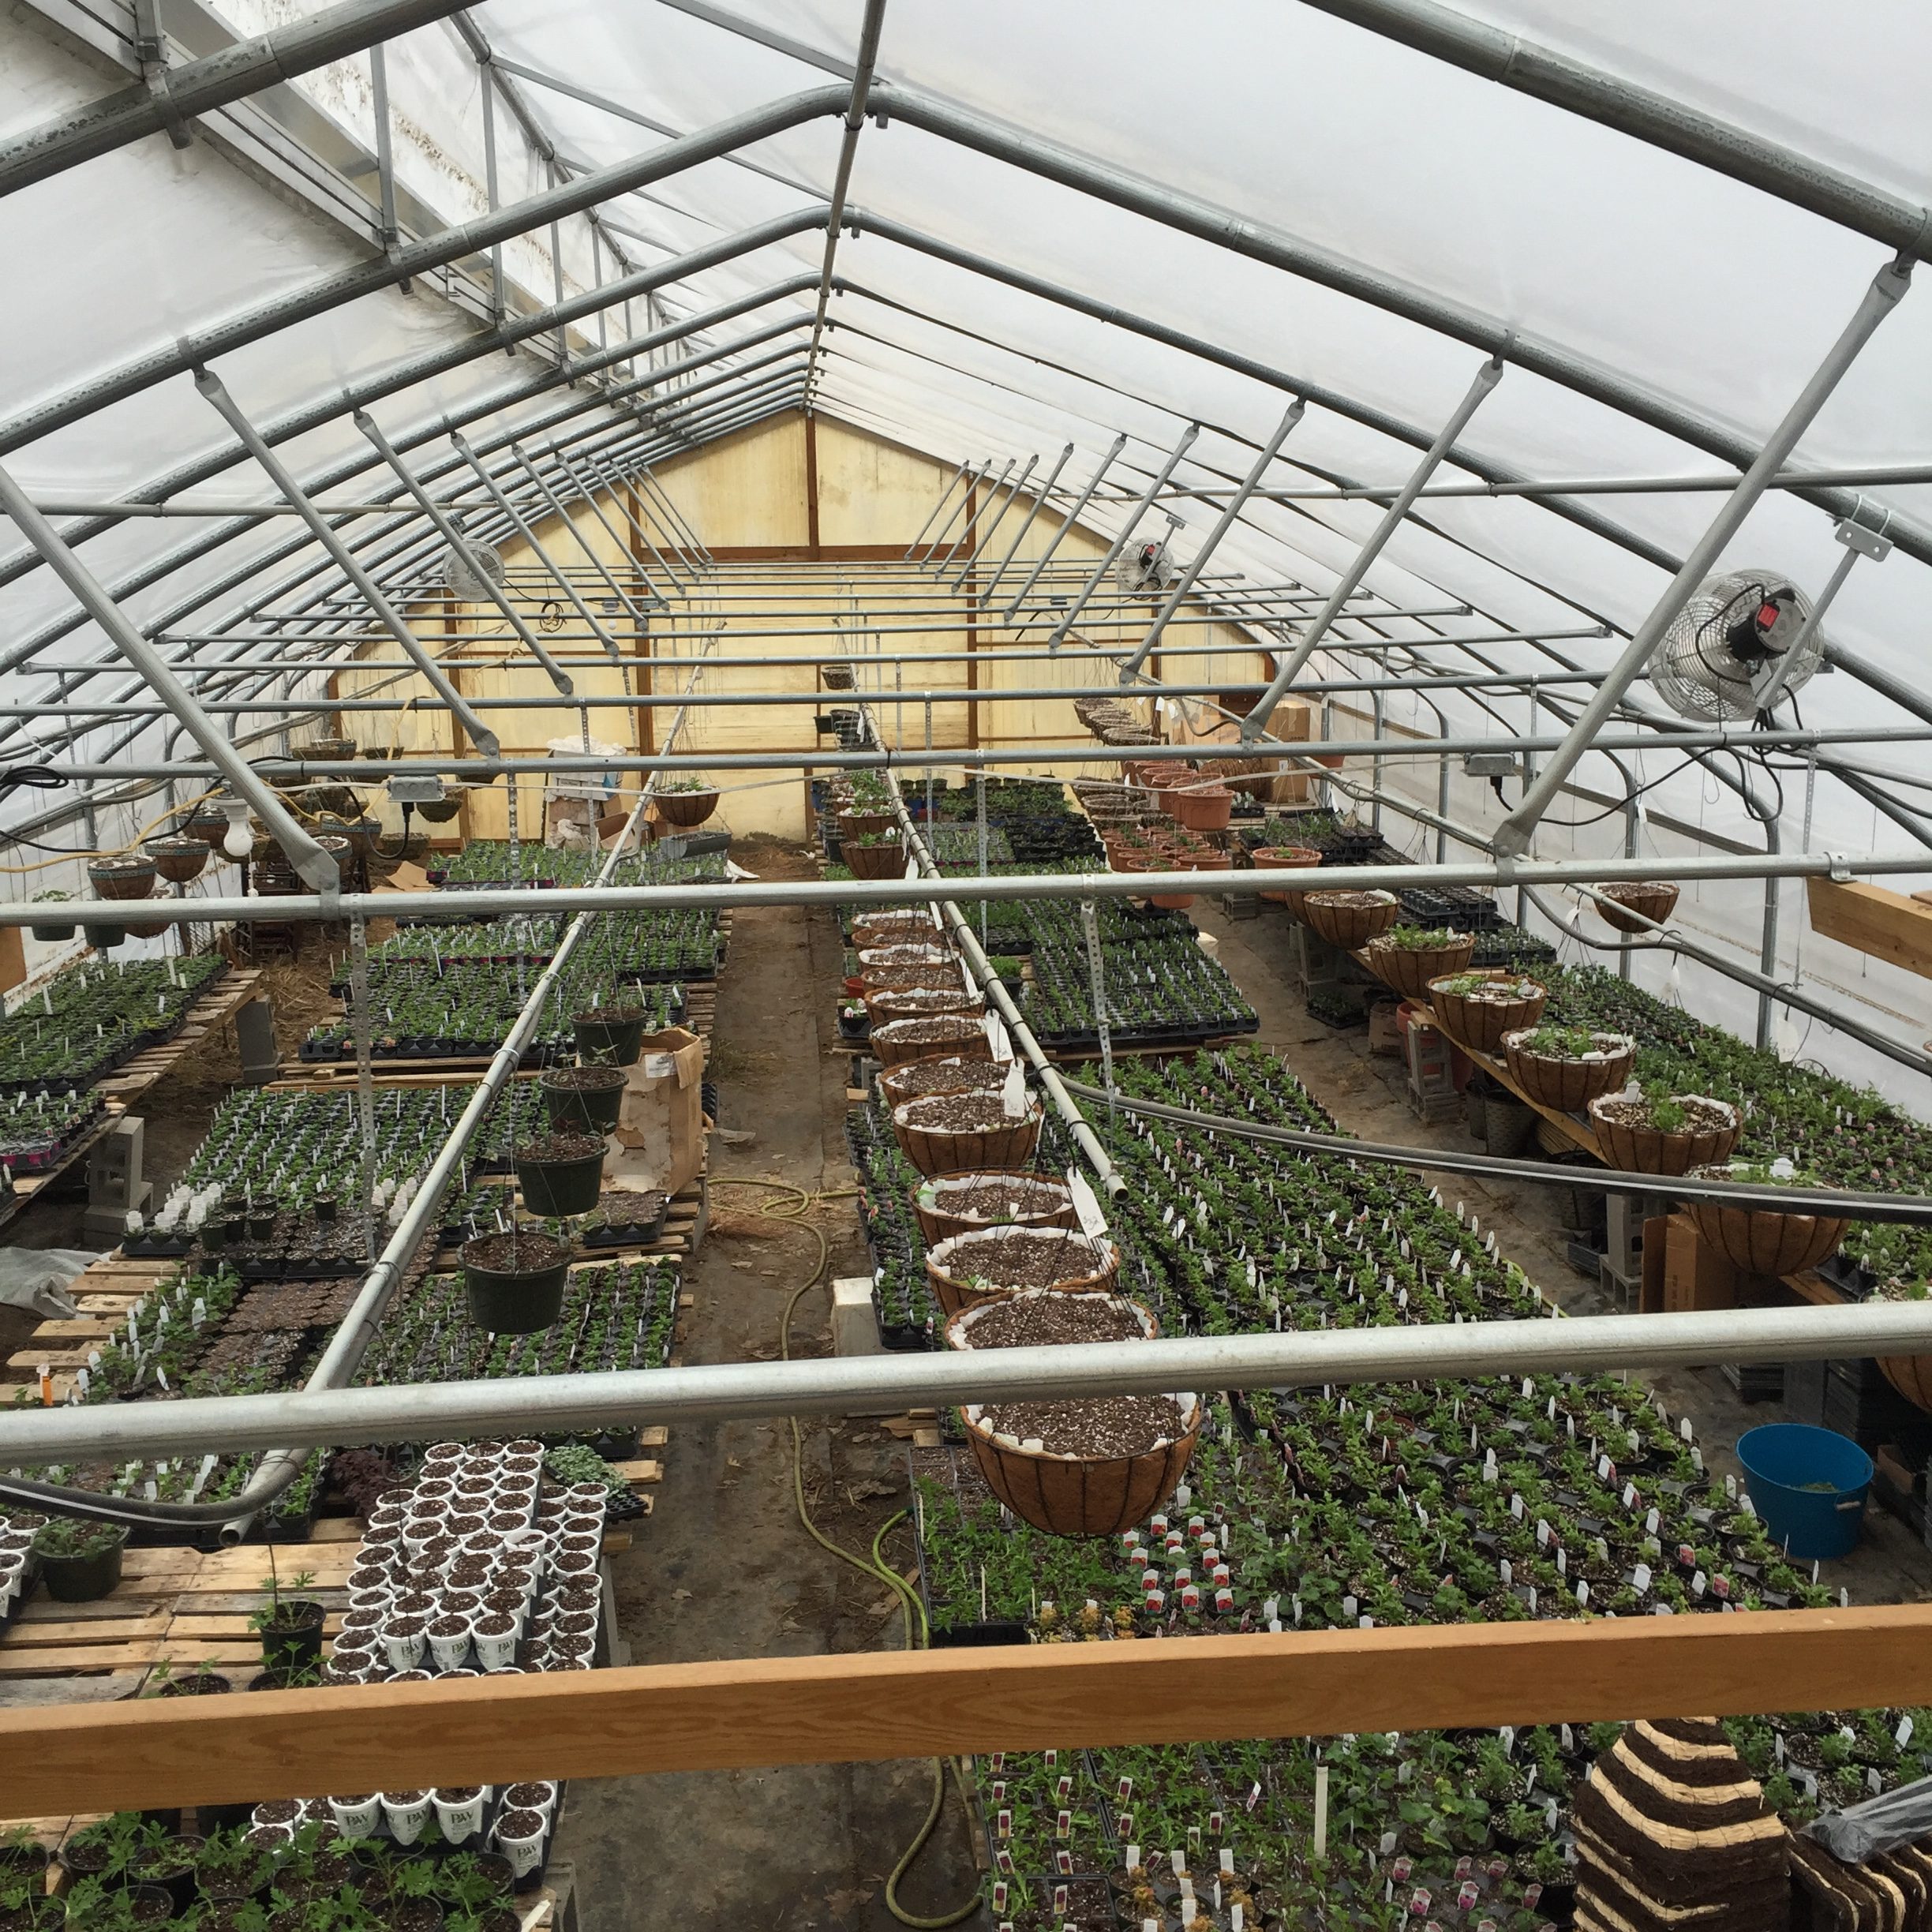 A view of the greenhouse in February Image